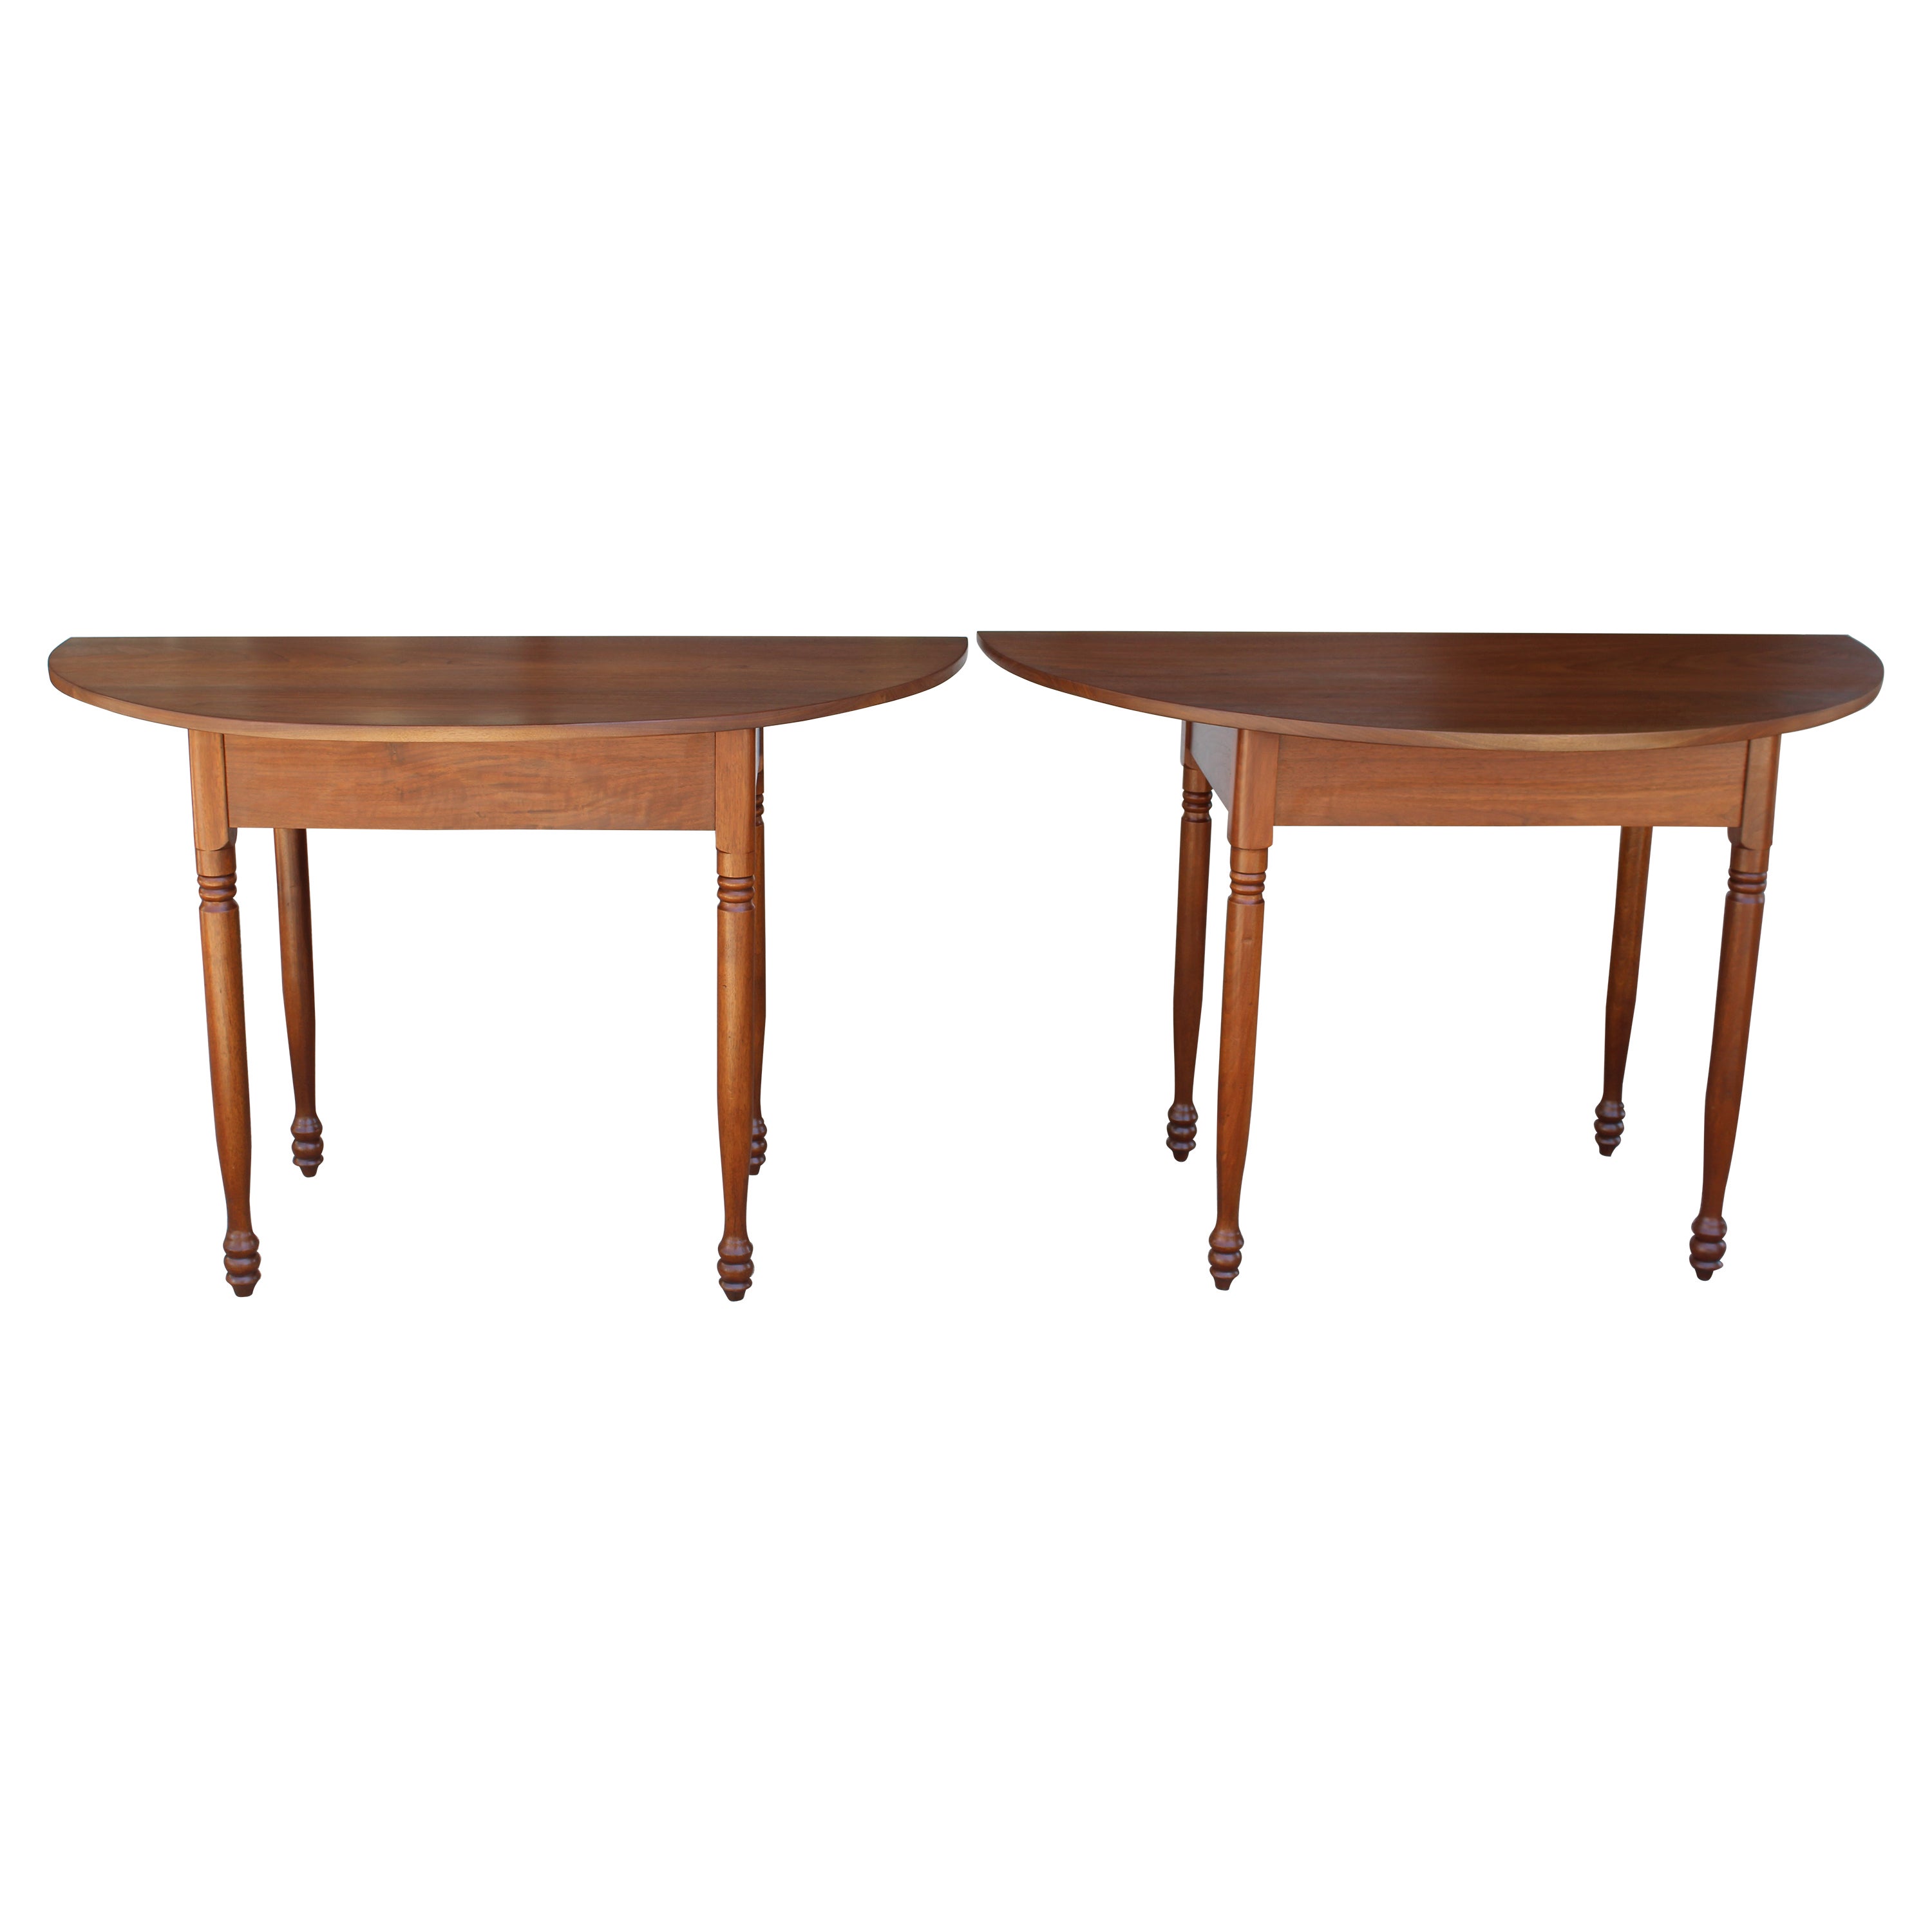 Pair of Country Demi-lune Tables